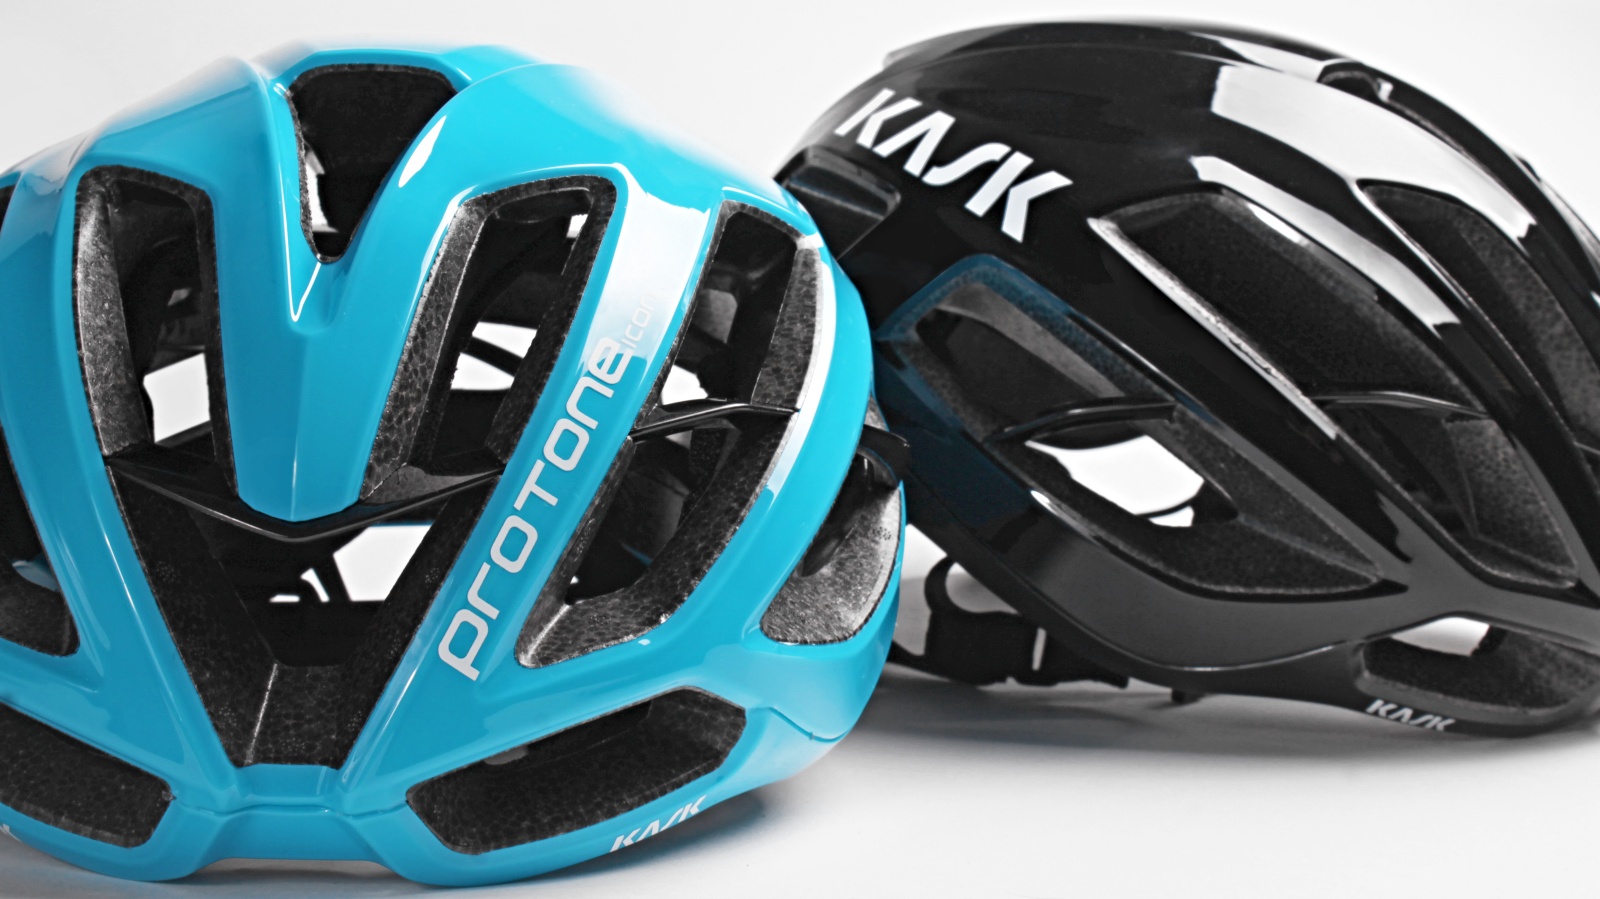 KASK Protone ICON Helmet - Available in different colors